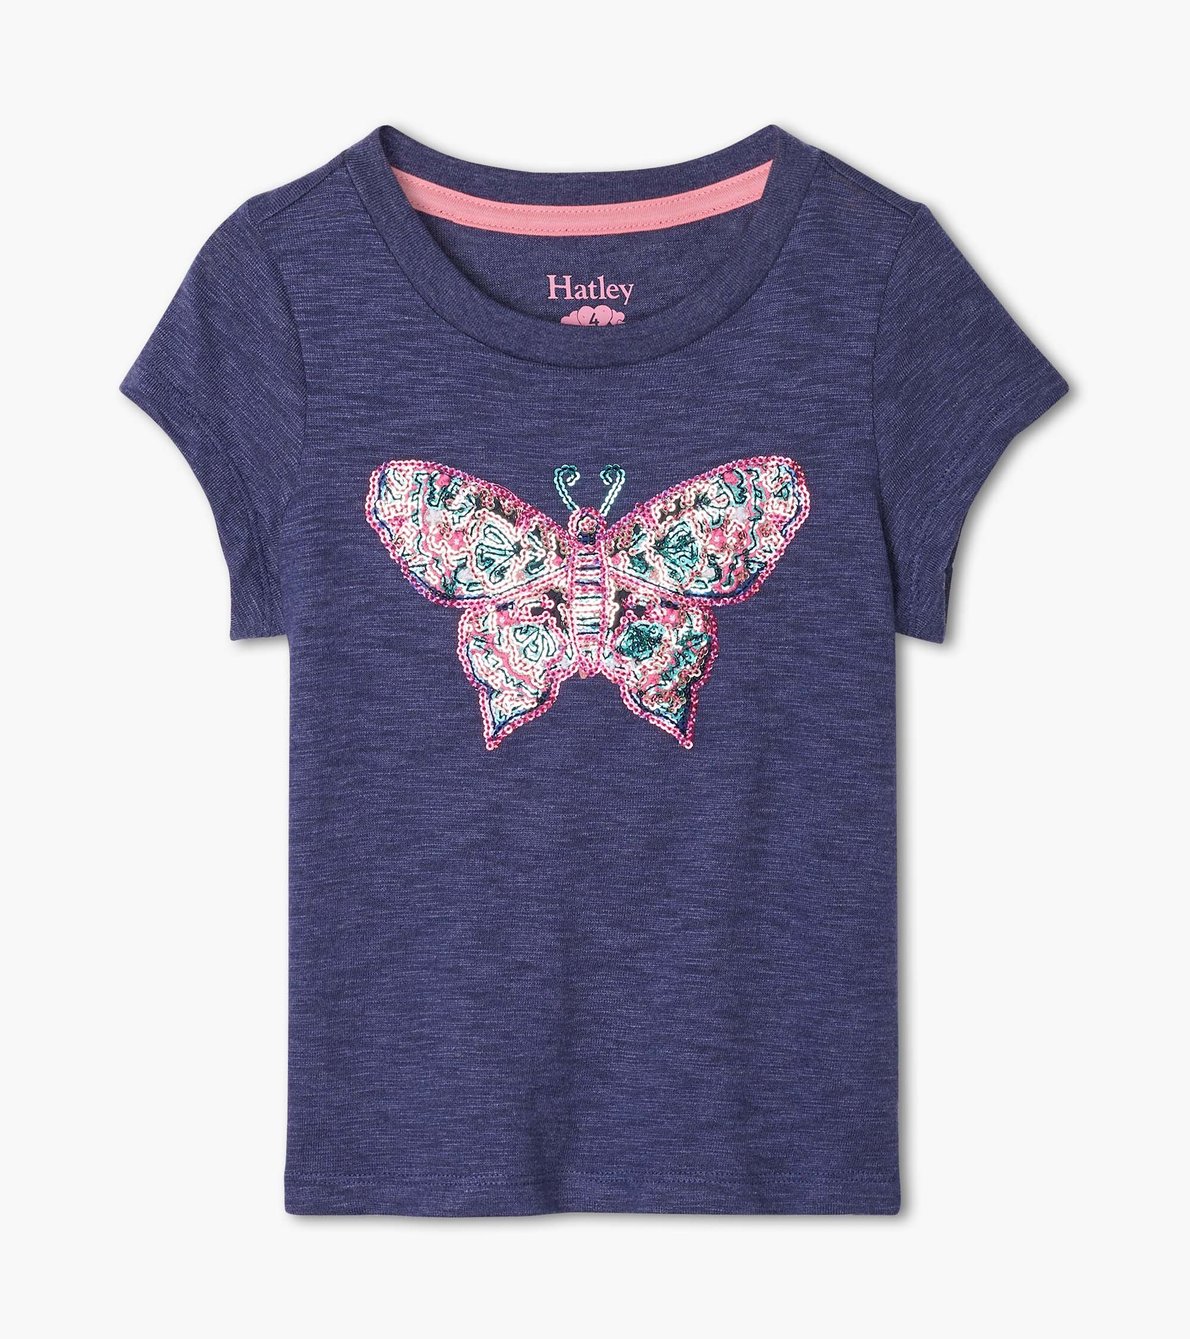 View larger image of Delightful Butterfly Graphic Tee